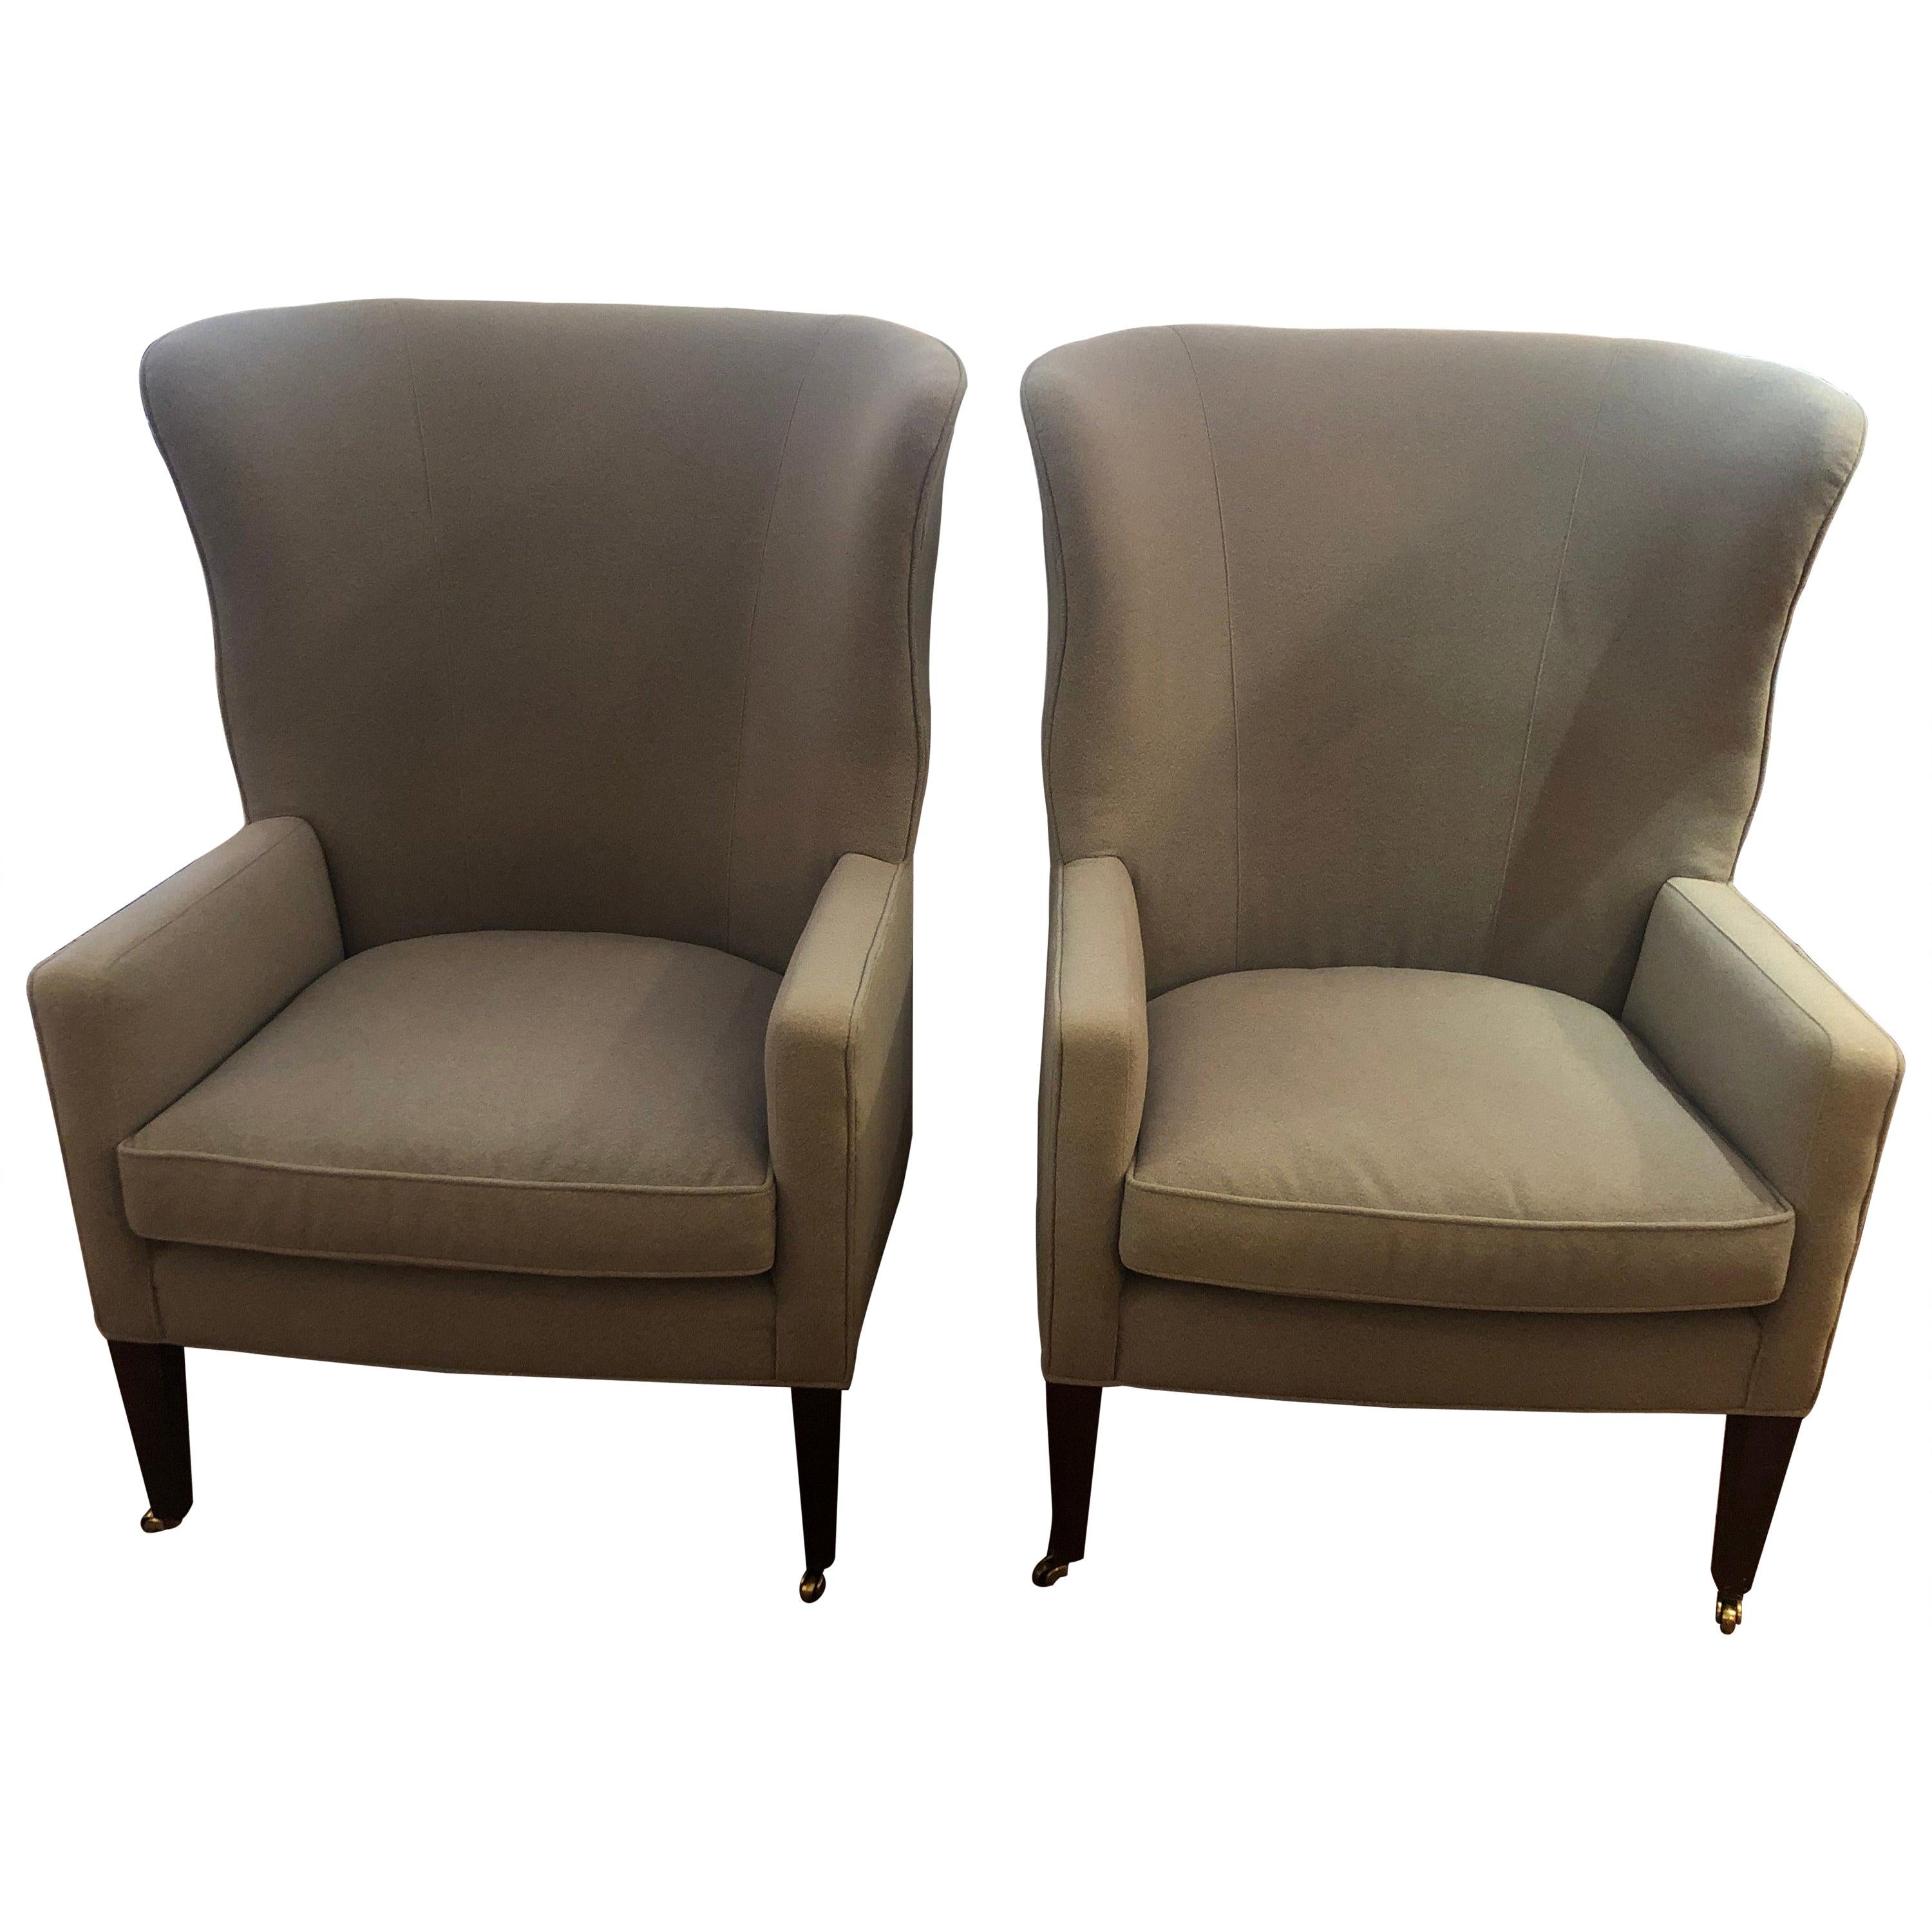 Sumptuous Pair of Grey Flannel Upholstered Barrel Back Wing Chairs